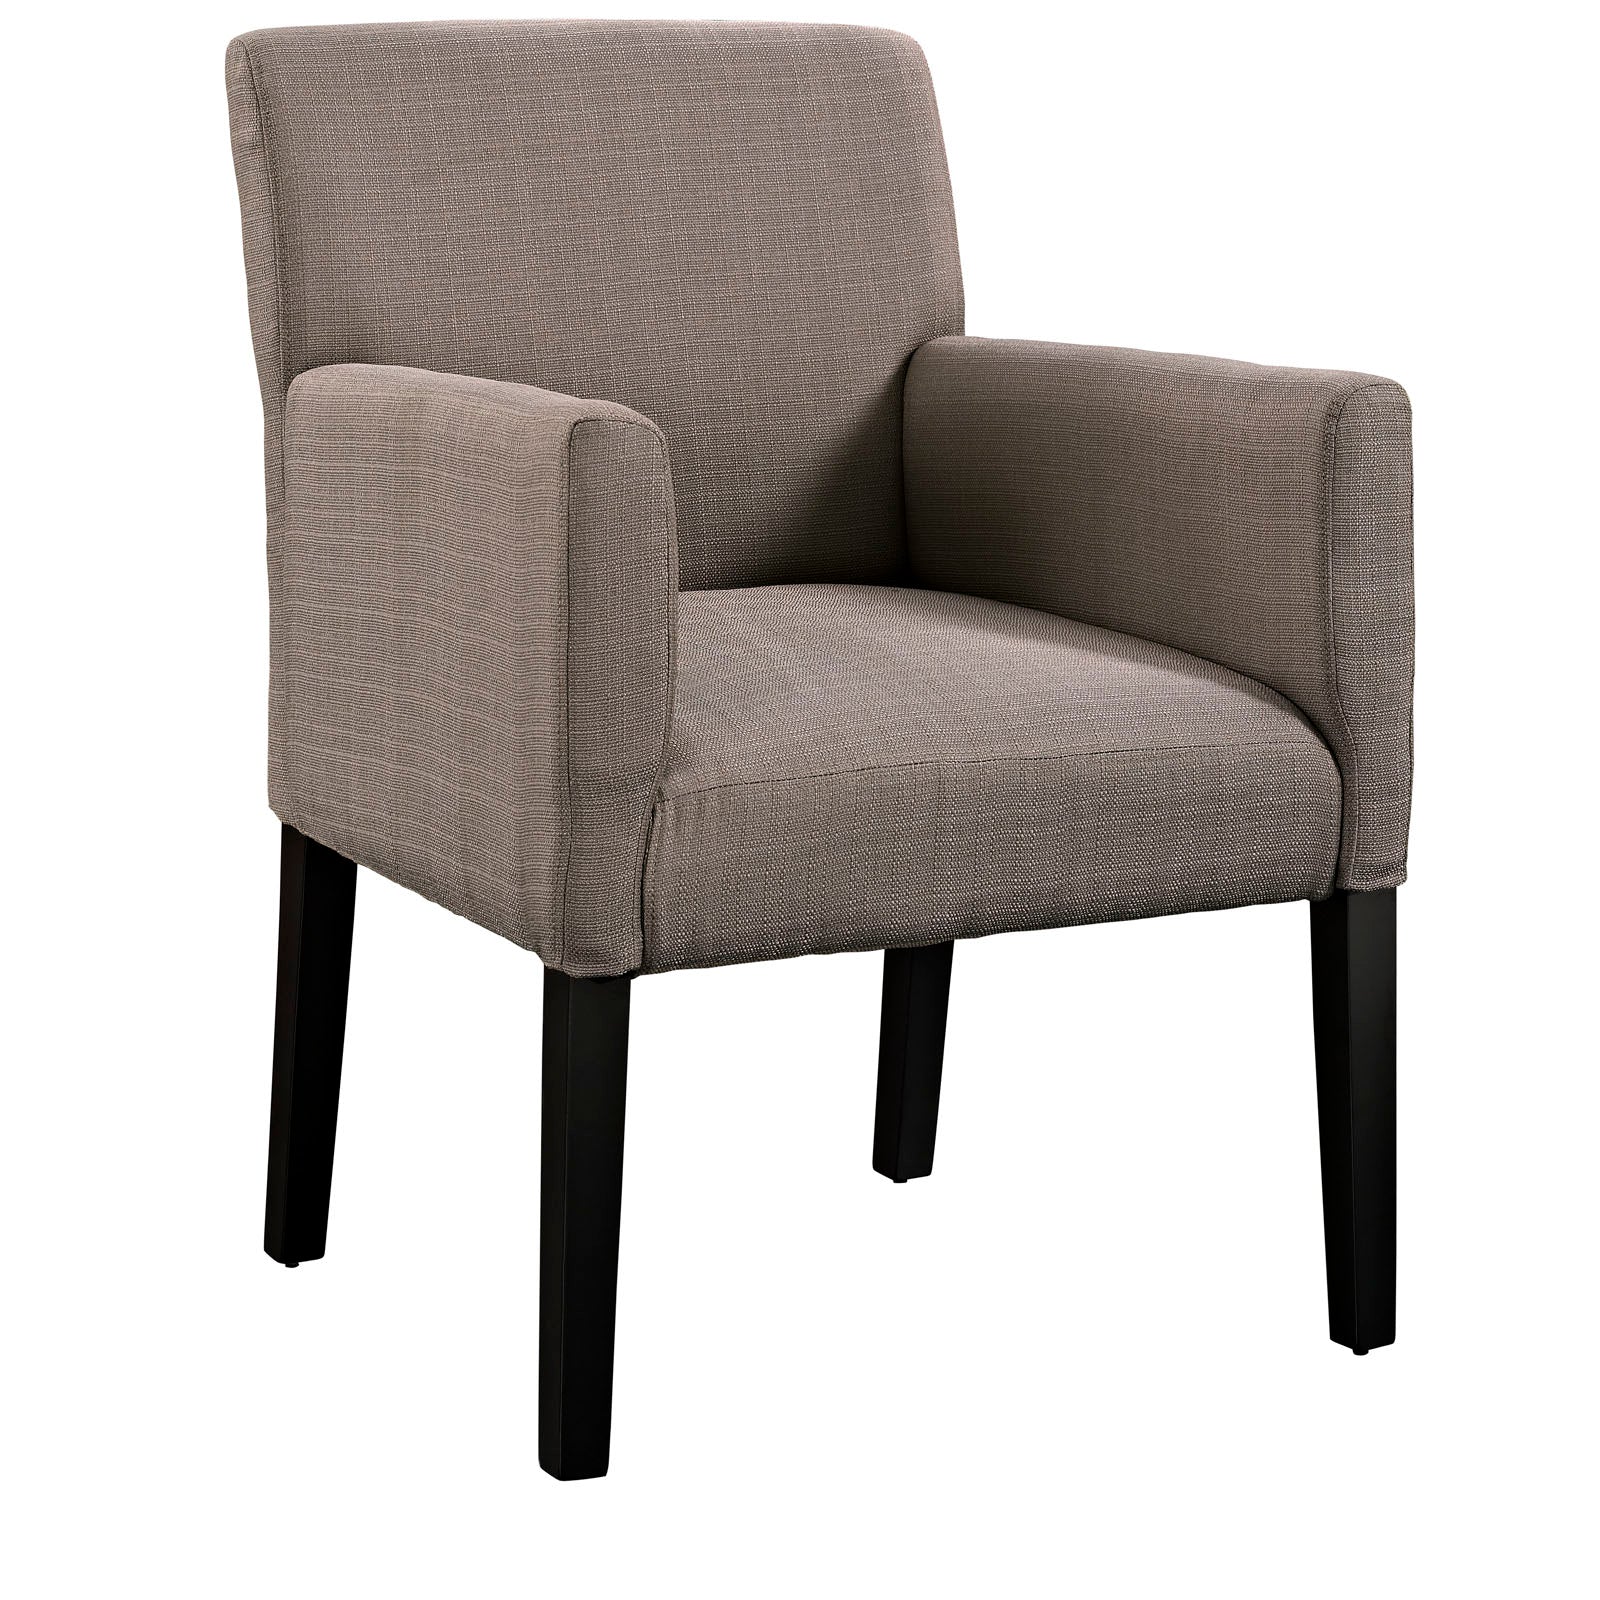 Modway Chairs - Chloe Upholstered Fabric Armchair Gray